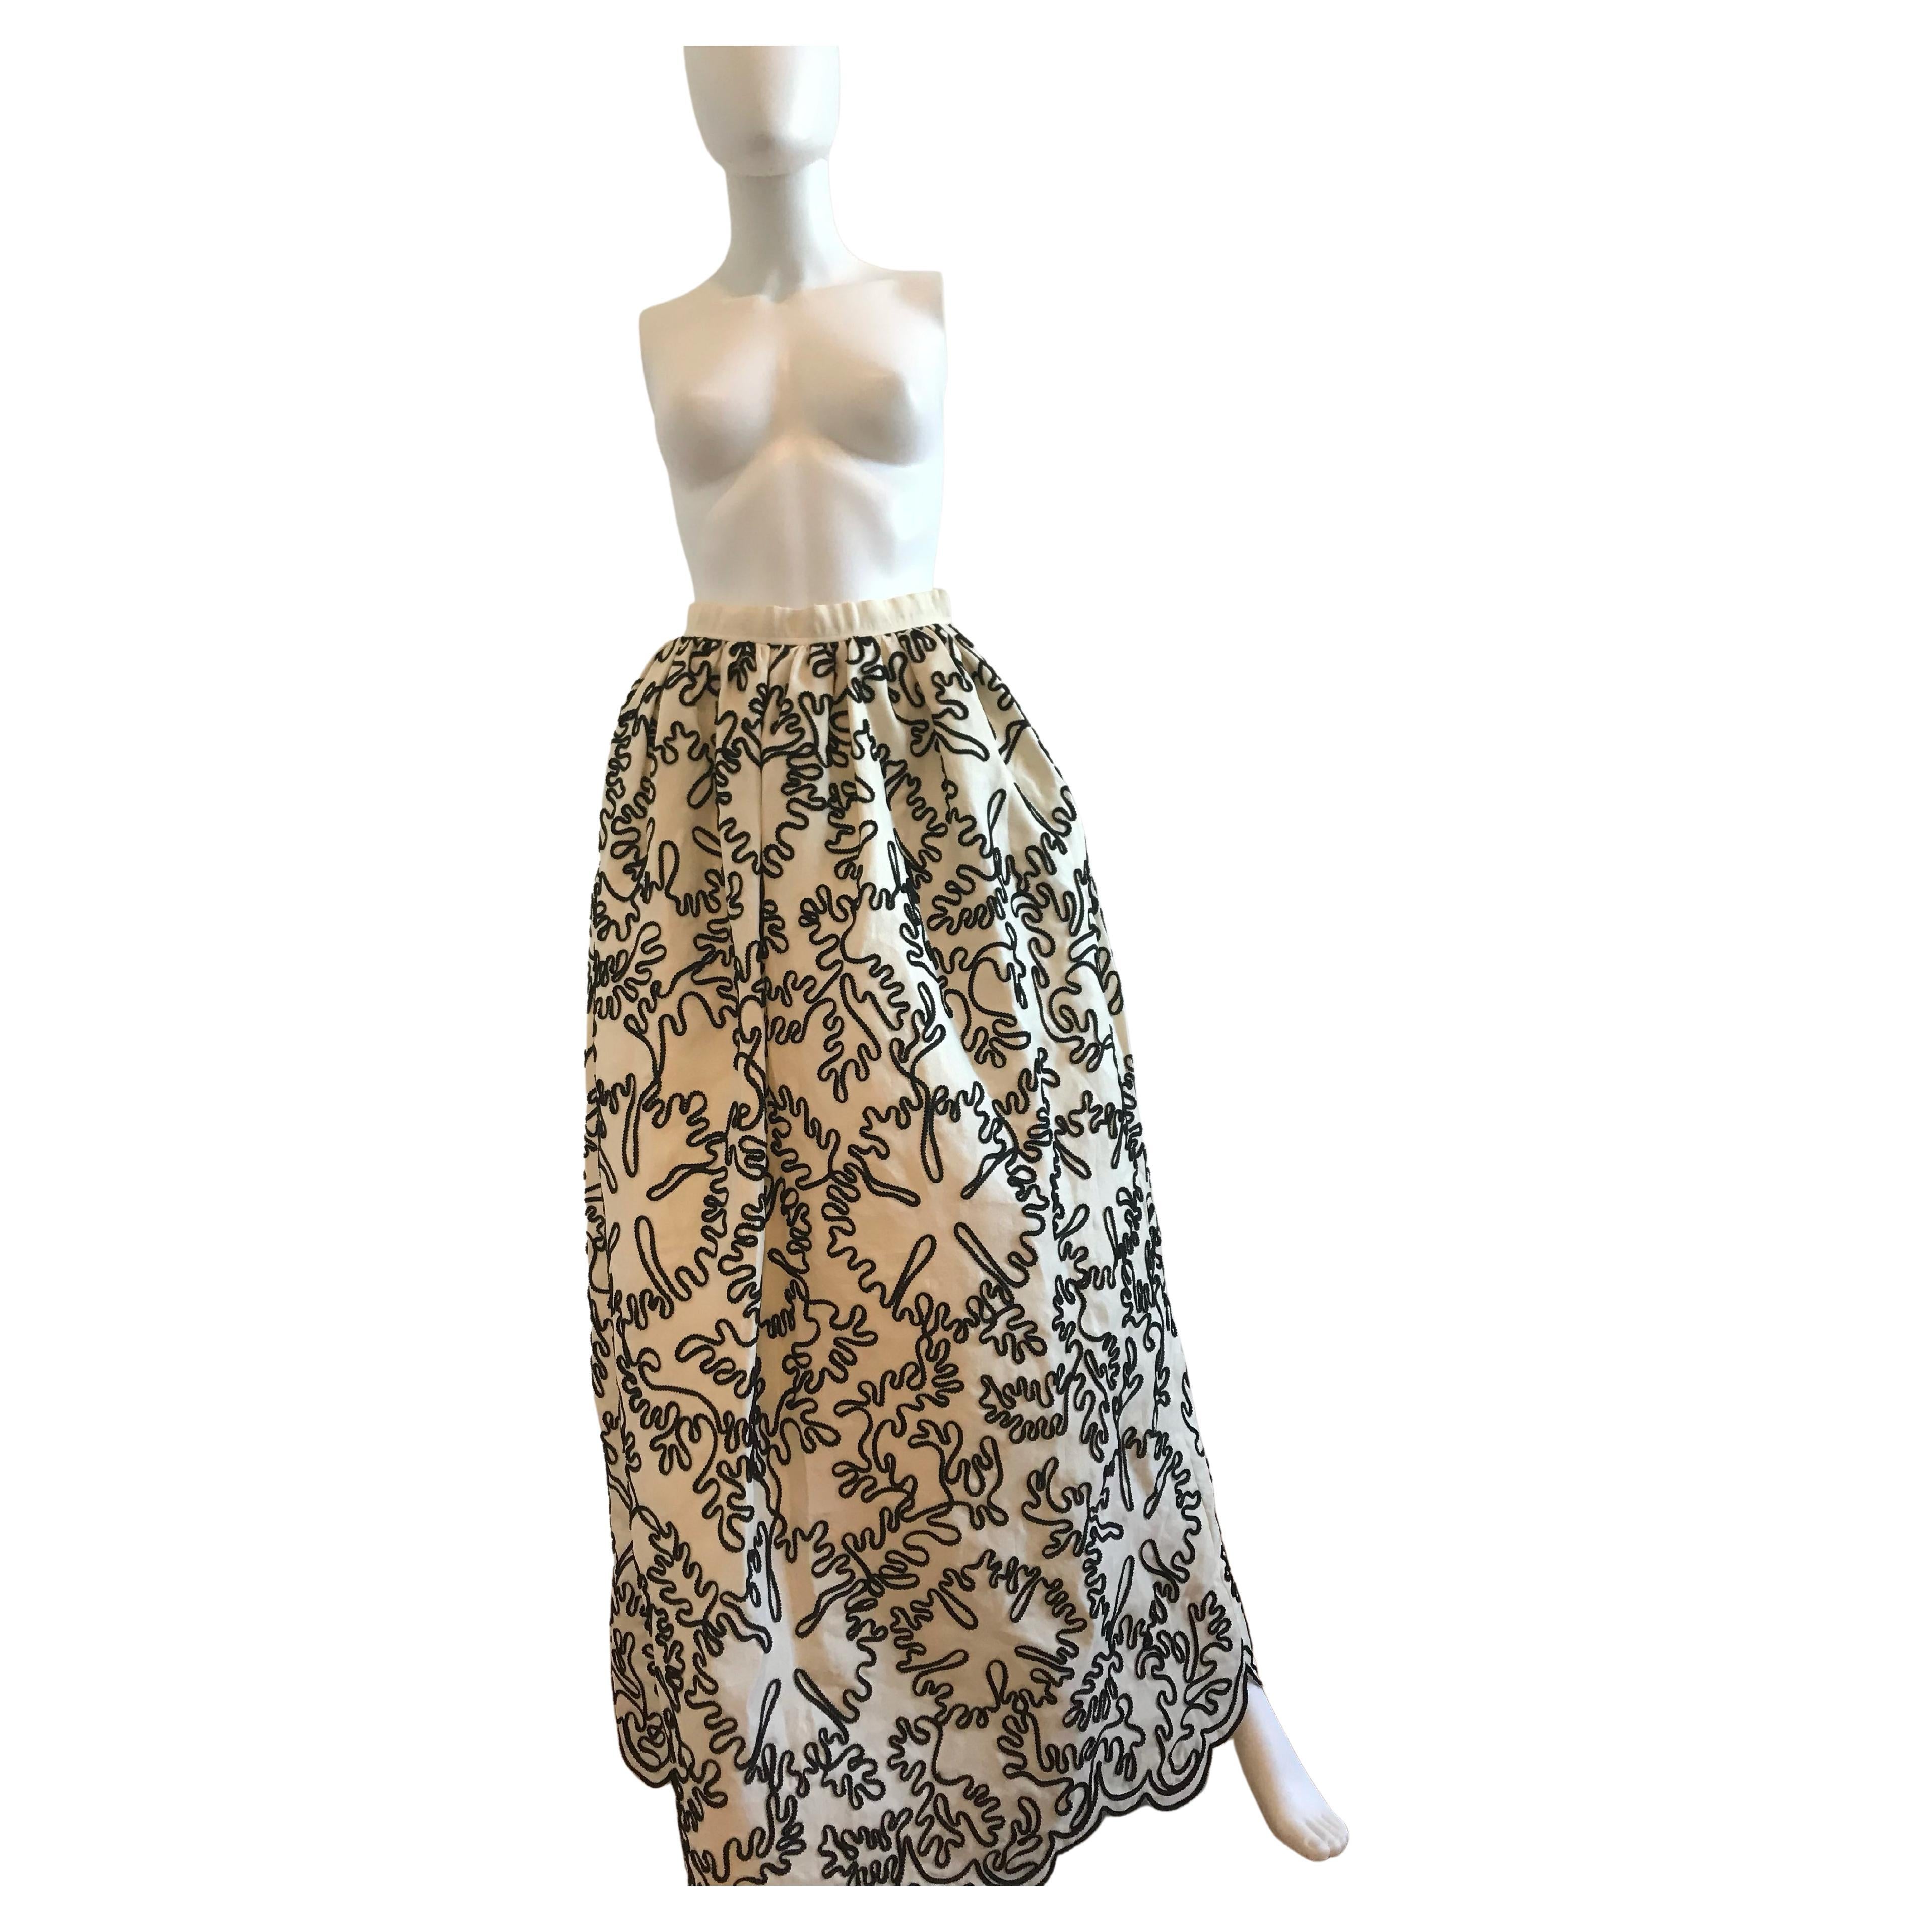 Vintage Oscar De La Renta White Silk Skirt with Black Embroidery
Made in the USA

Please be mindful that this piece has led a previous life, and may tell its story through minor imperfection. Purchasing this item continues its narrative, so you can